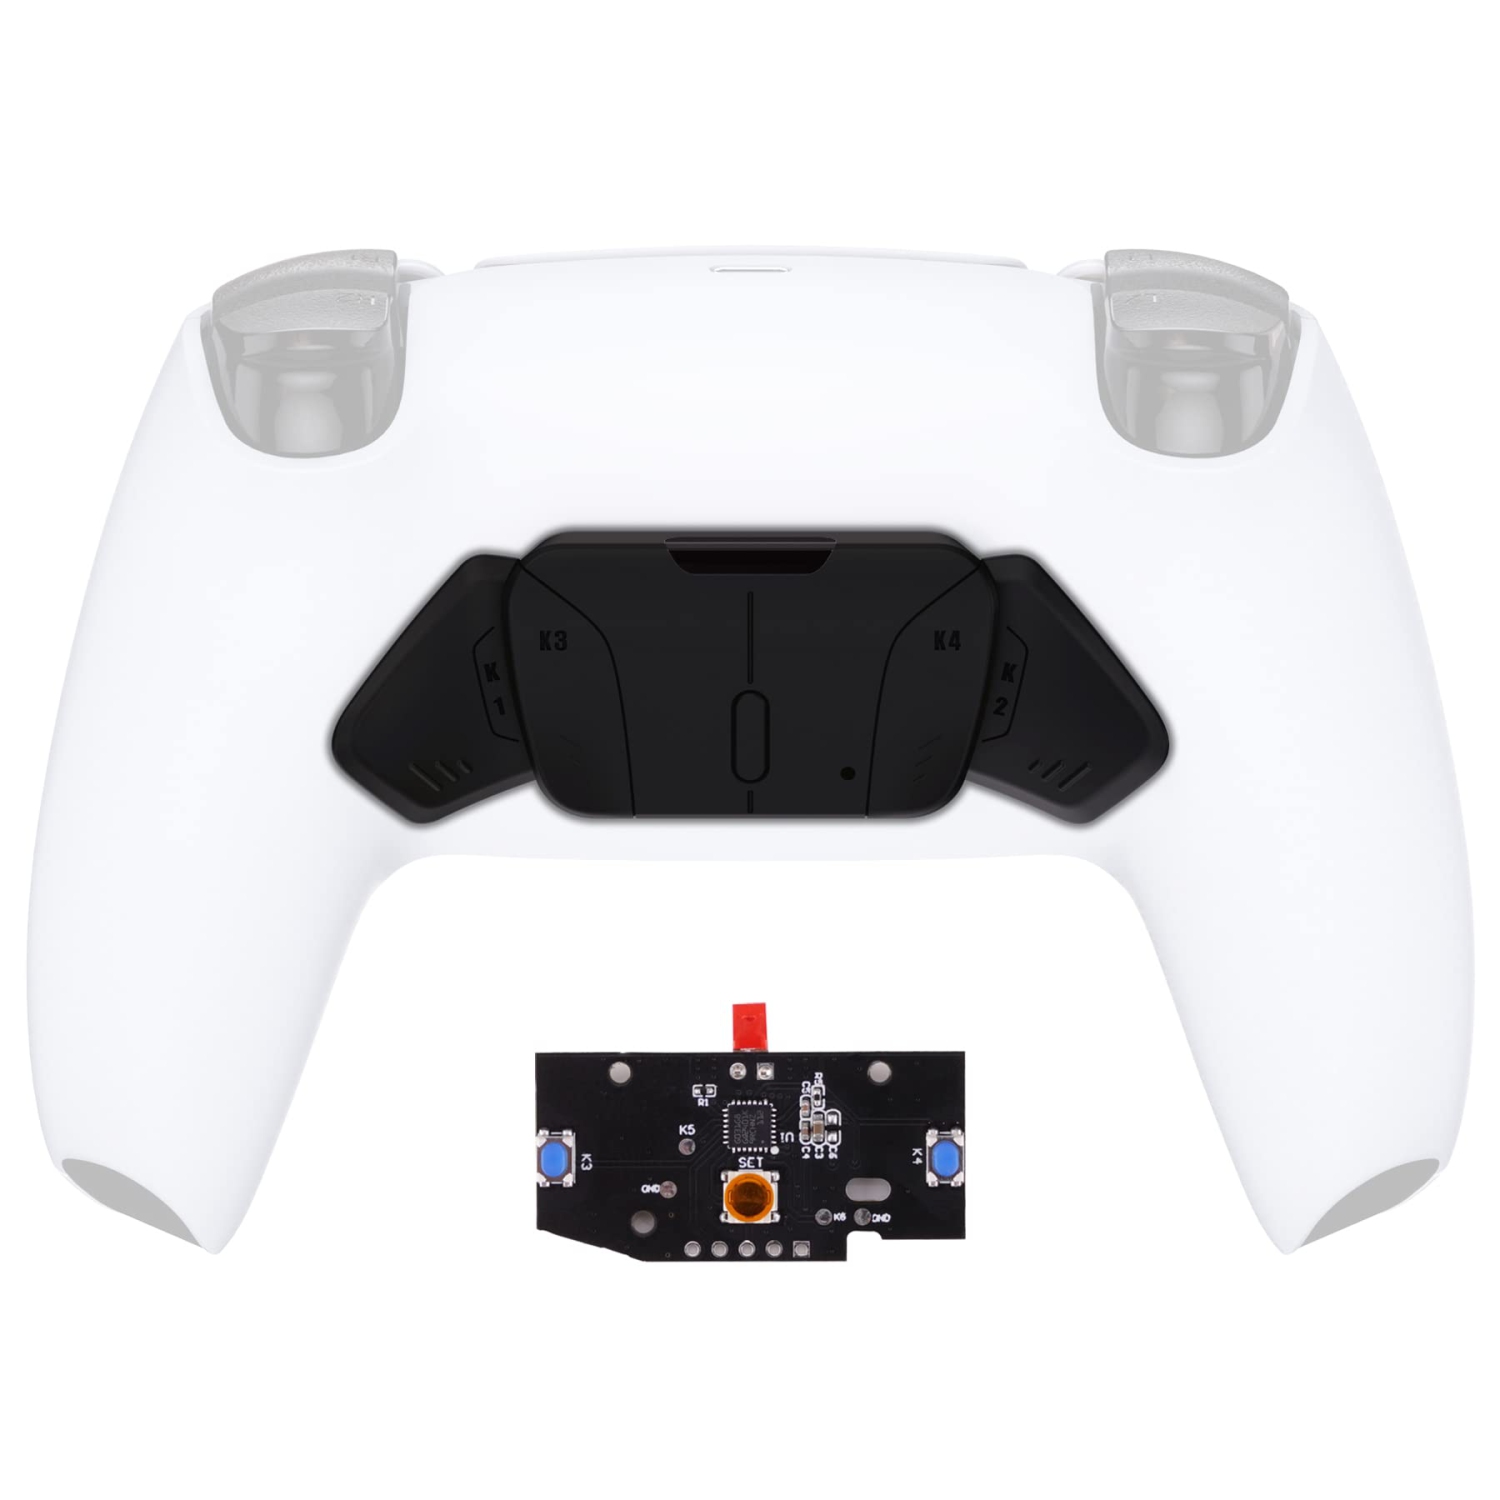 Redesigned Solid Black K1 K2 K3 K4 Back Buttons Housing & Remap PCB Board for PS5 Controller eXtremeRate Rise & RISE4 Remap kit - Controller & Other Accessories NOT Included